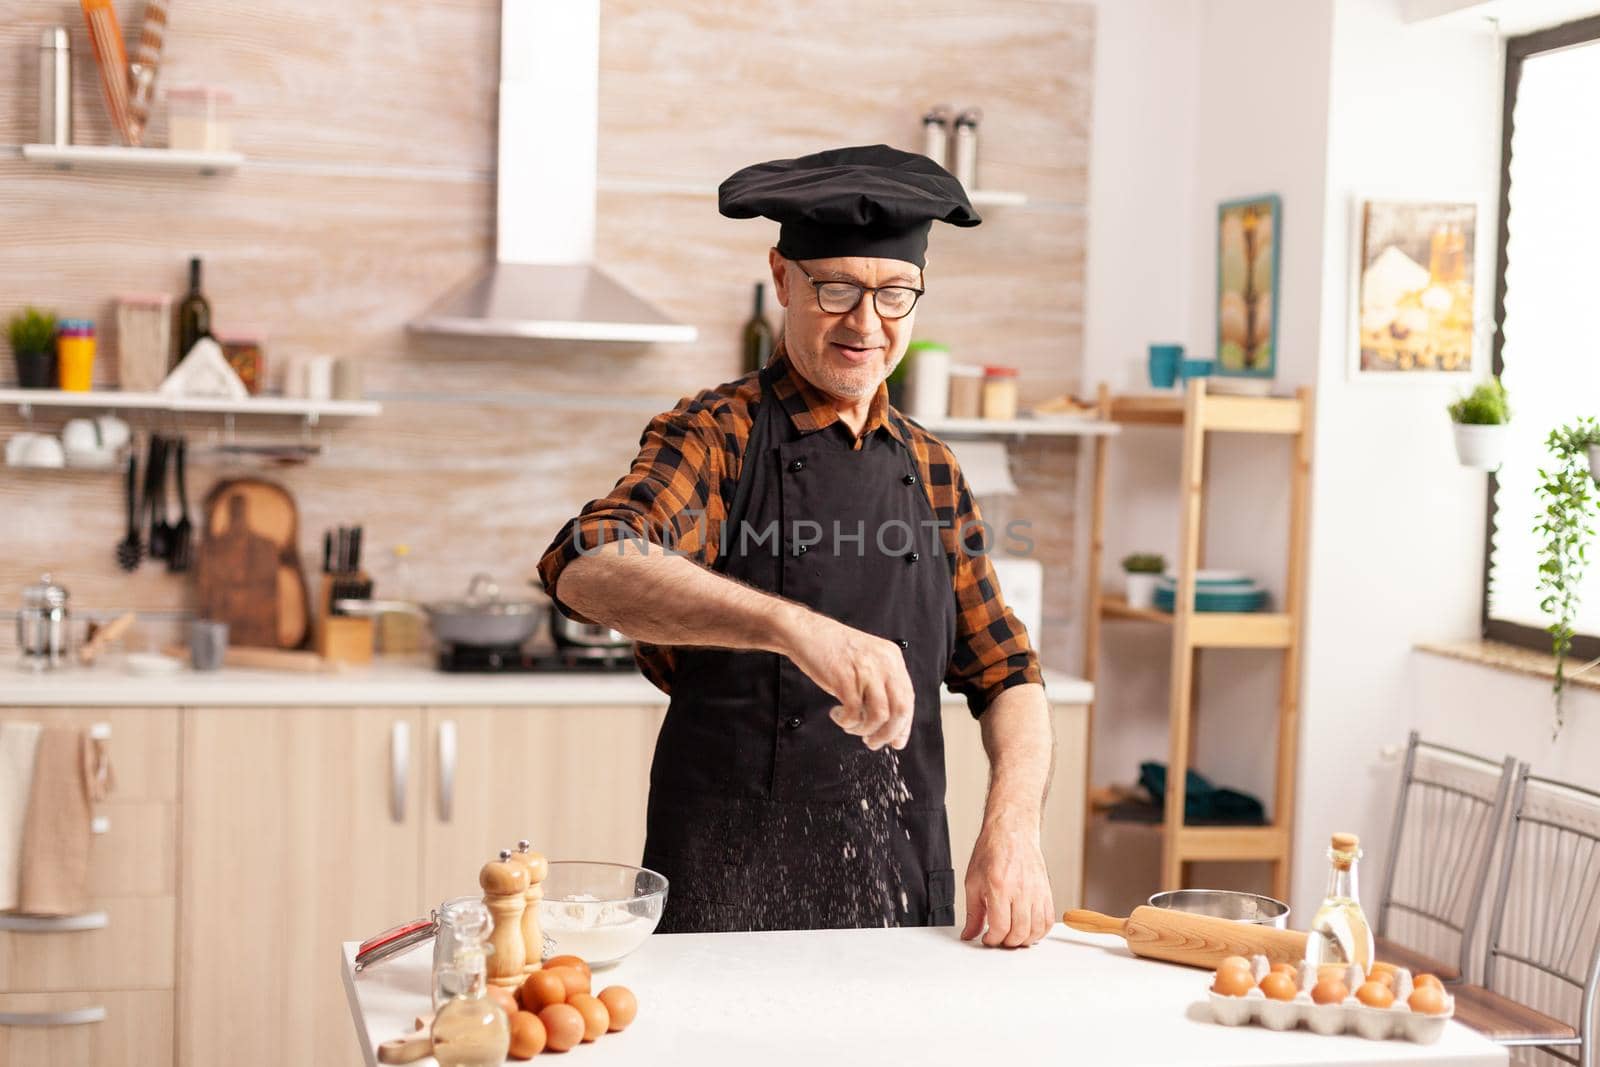 Senior baker in home kitchen during preparation of cookies using wheat flour. Retired senior chef with bonete and apron, in kitchen uniform sprinkling sieving sifting ingredients by hand